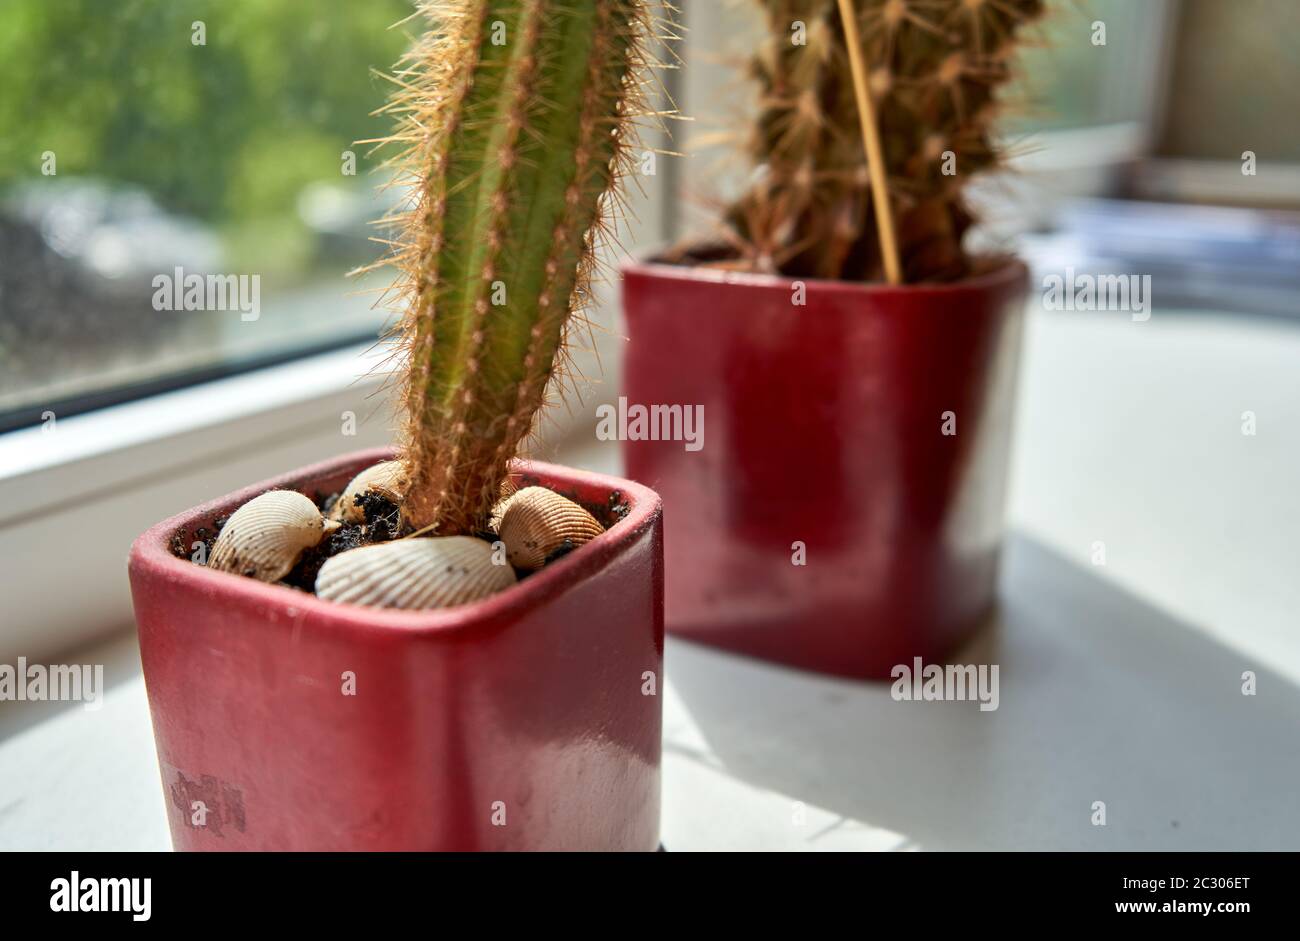 Small cactus in the red pot Stock Photo